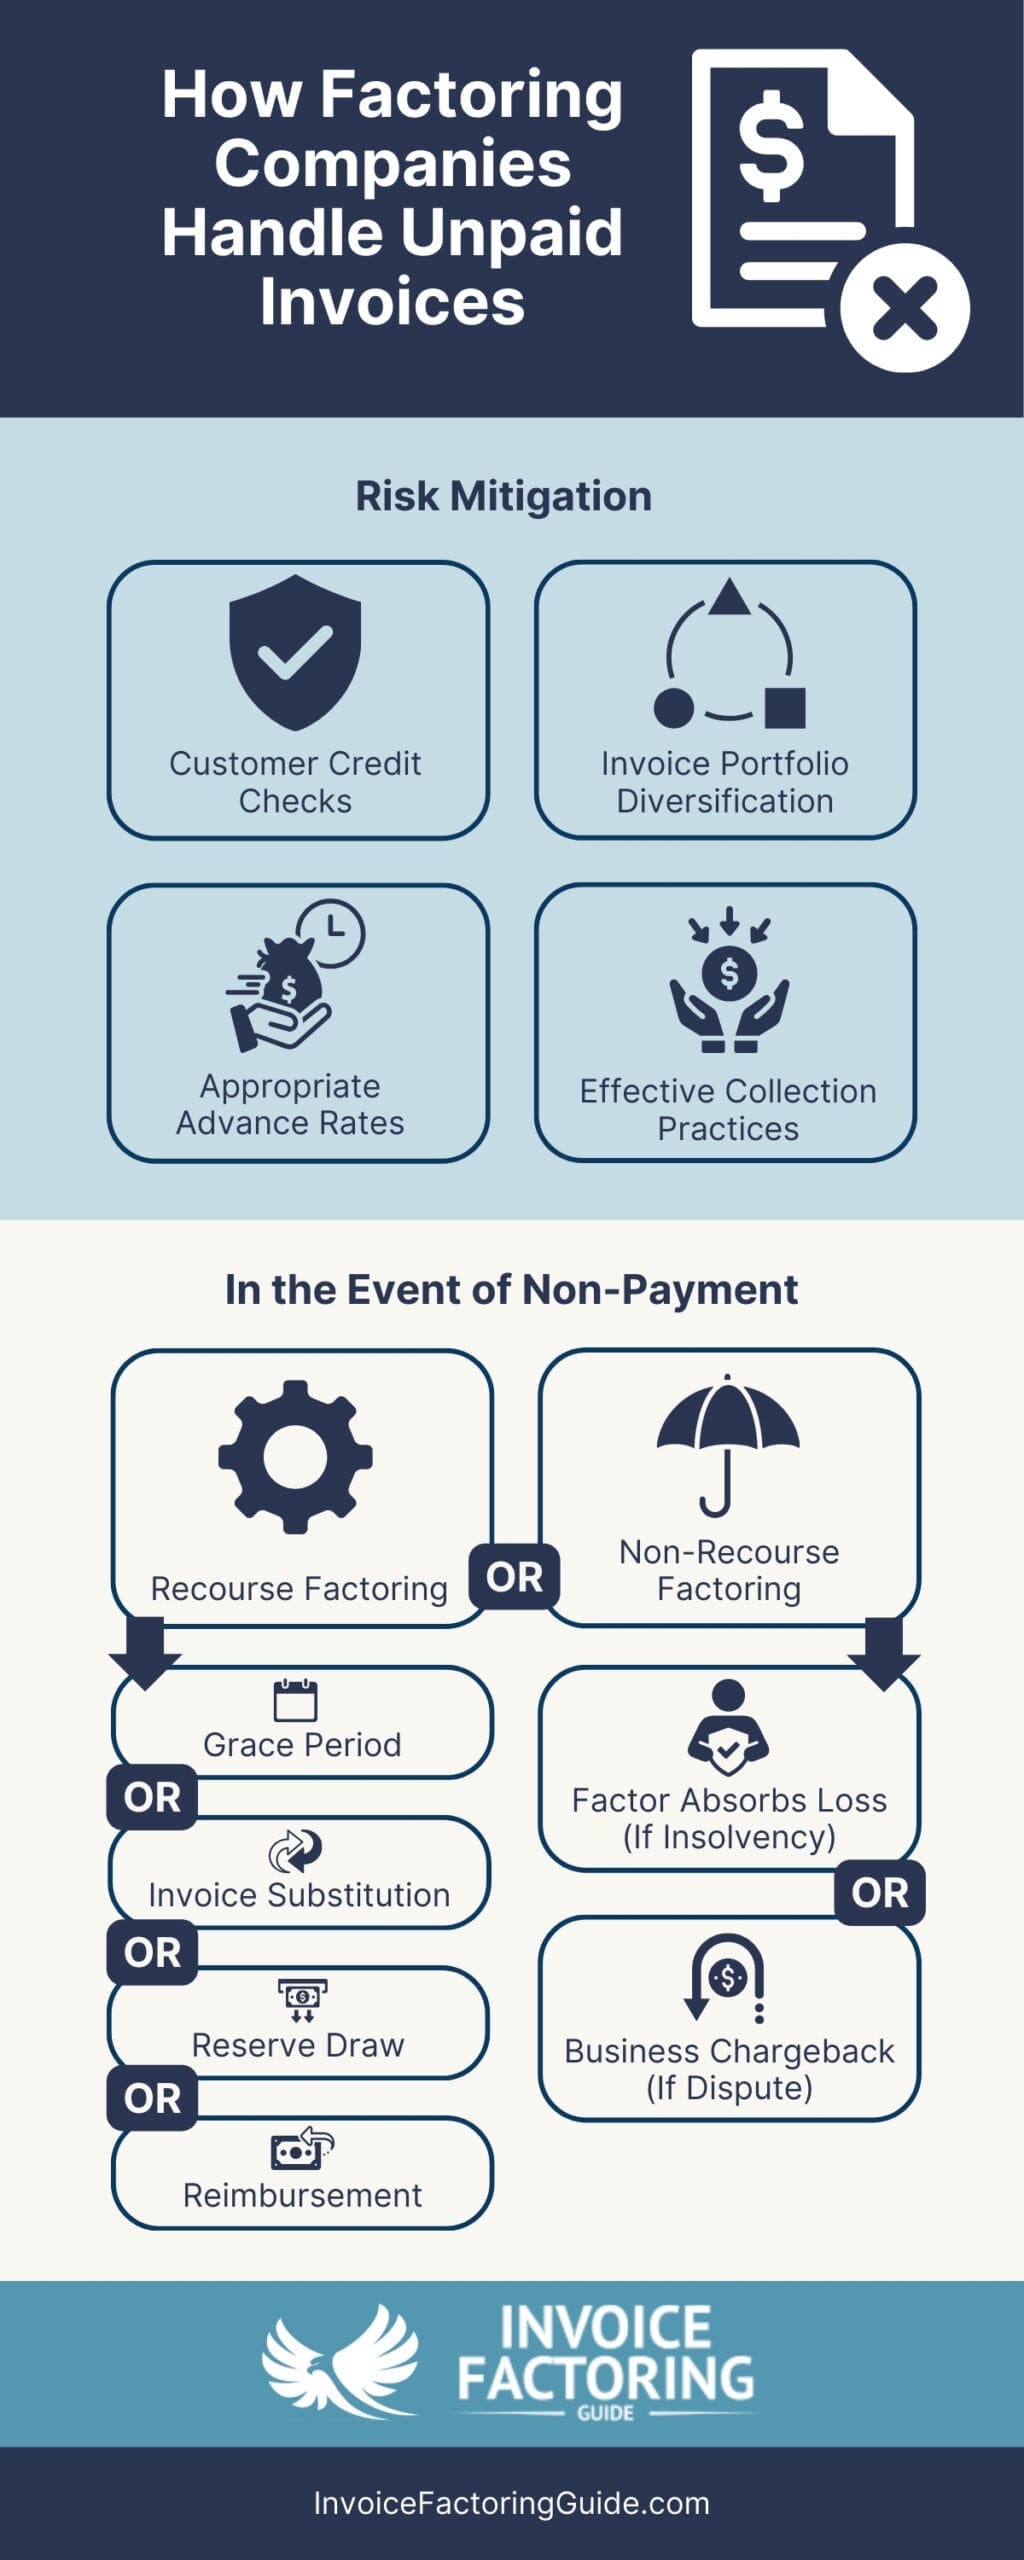 How Factoring Companies Handle Unpaid Invoices Infographic